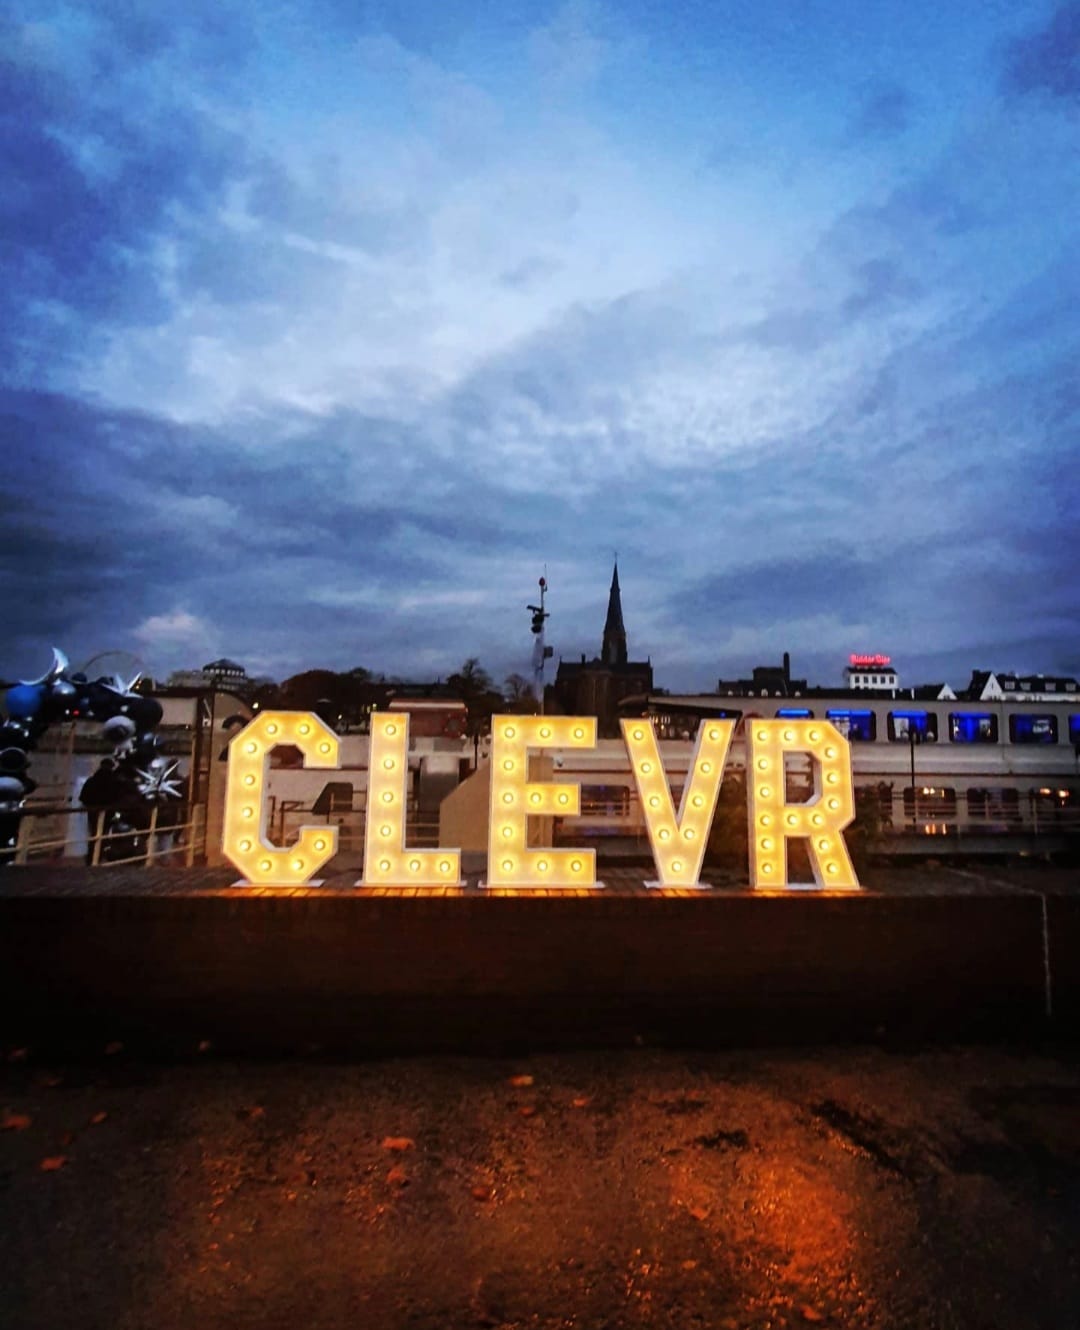 CLEVR